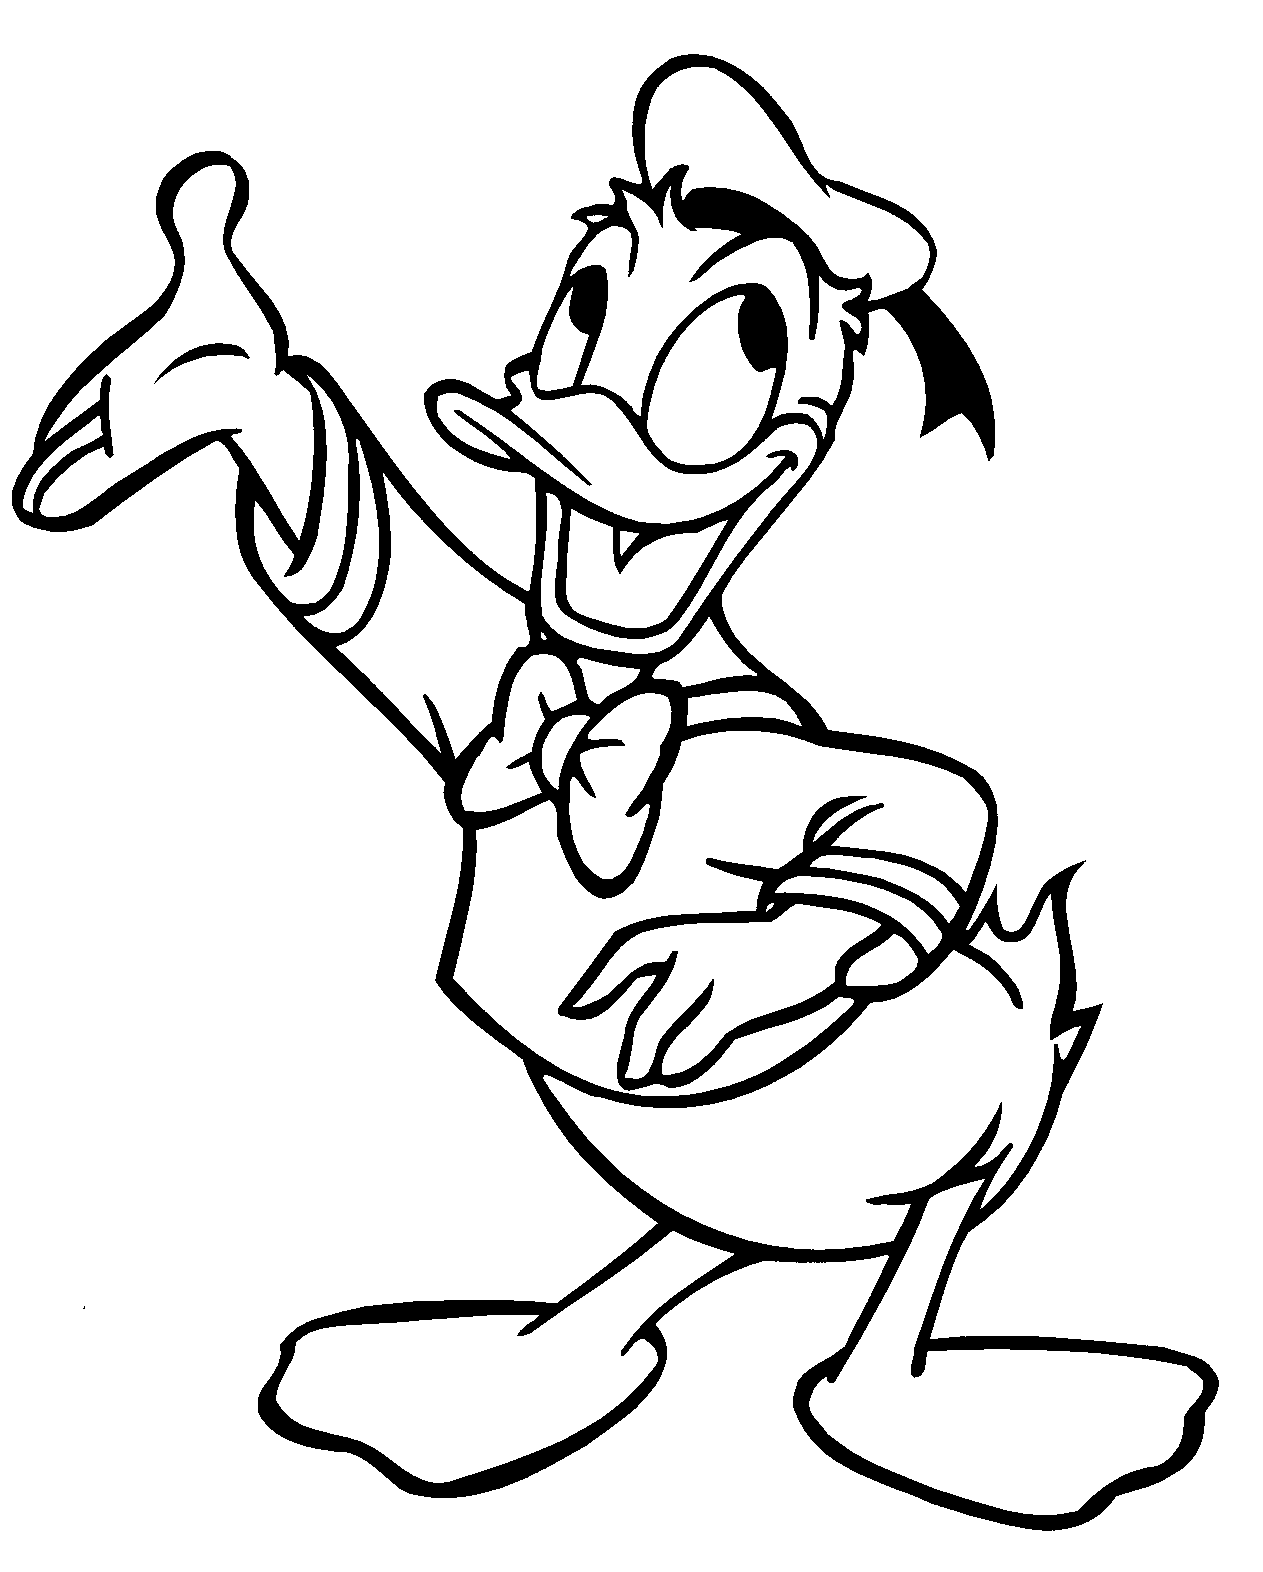 Donald Duck Coloring Pages To Print